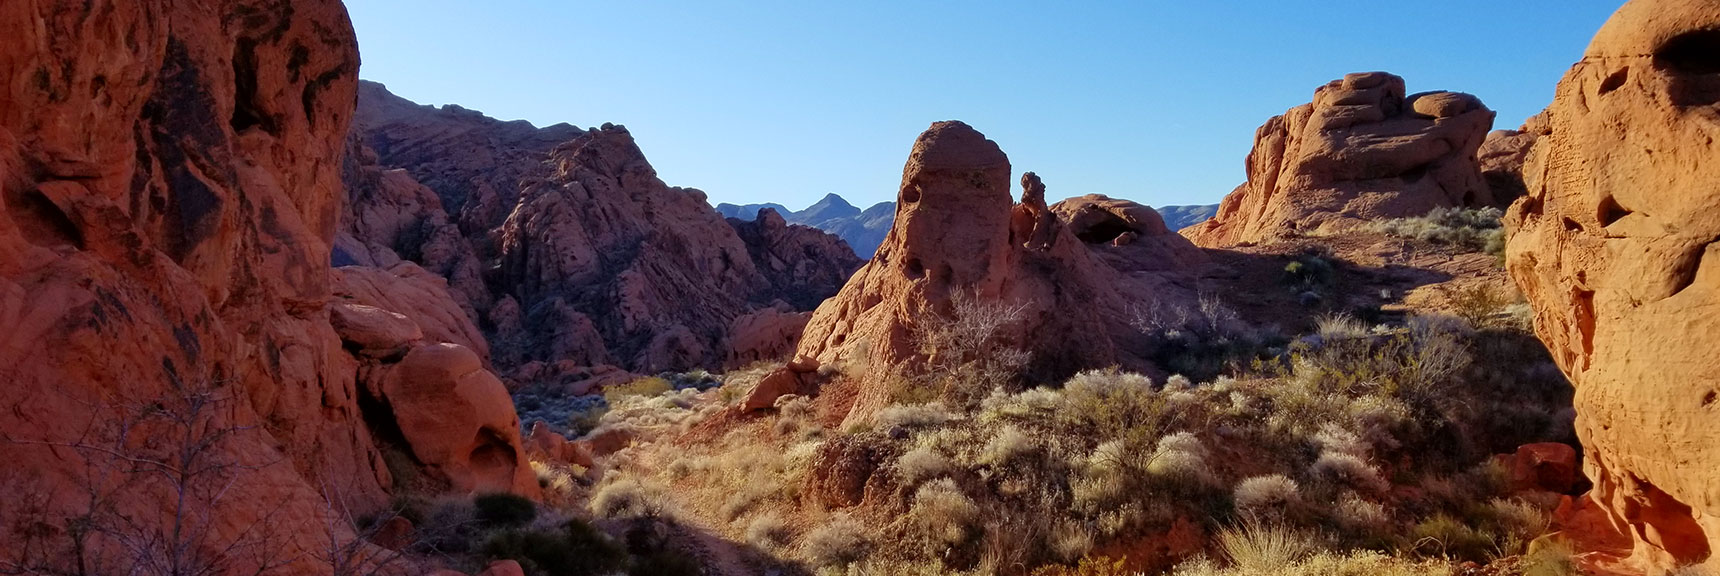 Looking Back South Through the Upper Pass on Prospect Trail in Valley of Fire State Park, Nevada